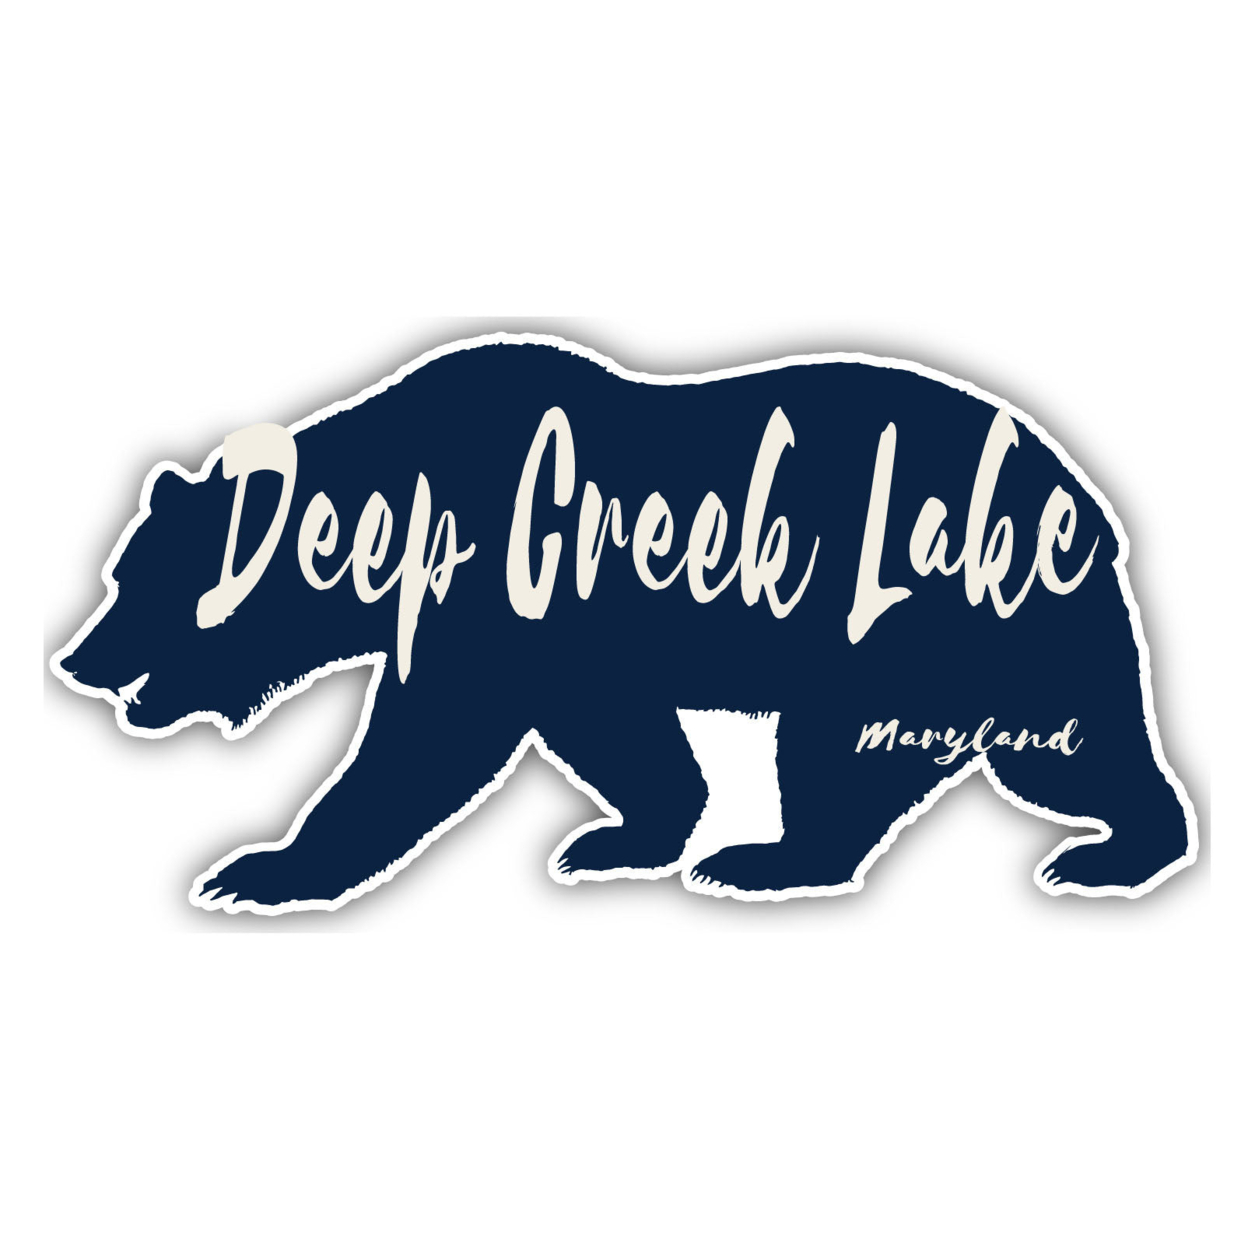 Deep Creek Lake Maryland Souvenir Decorative Stickers (Choose Theme And Size) - 4-Pack, 2-Inch, Bear